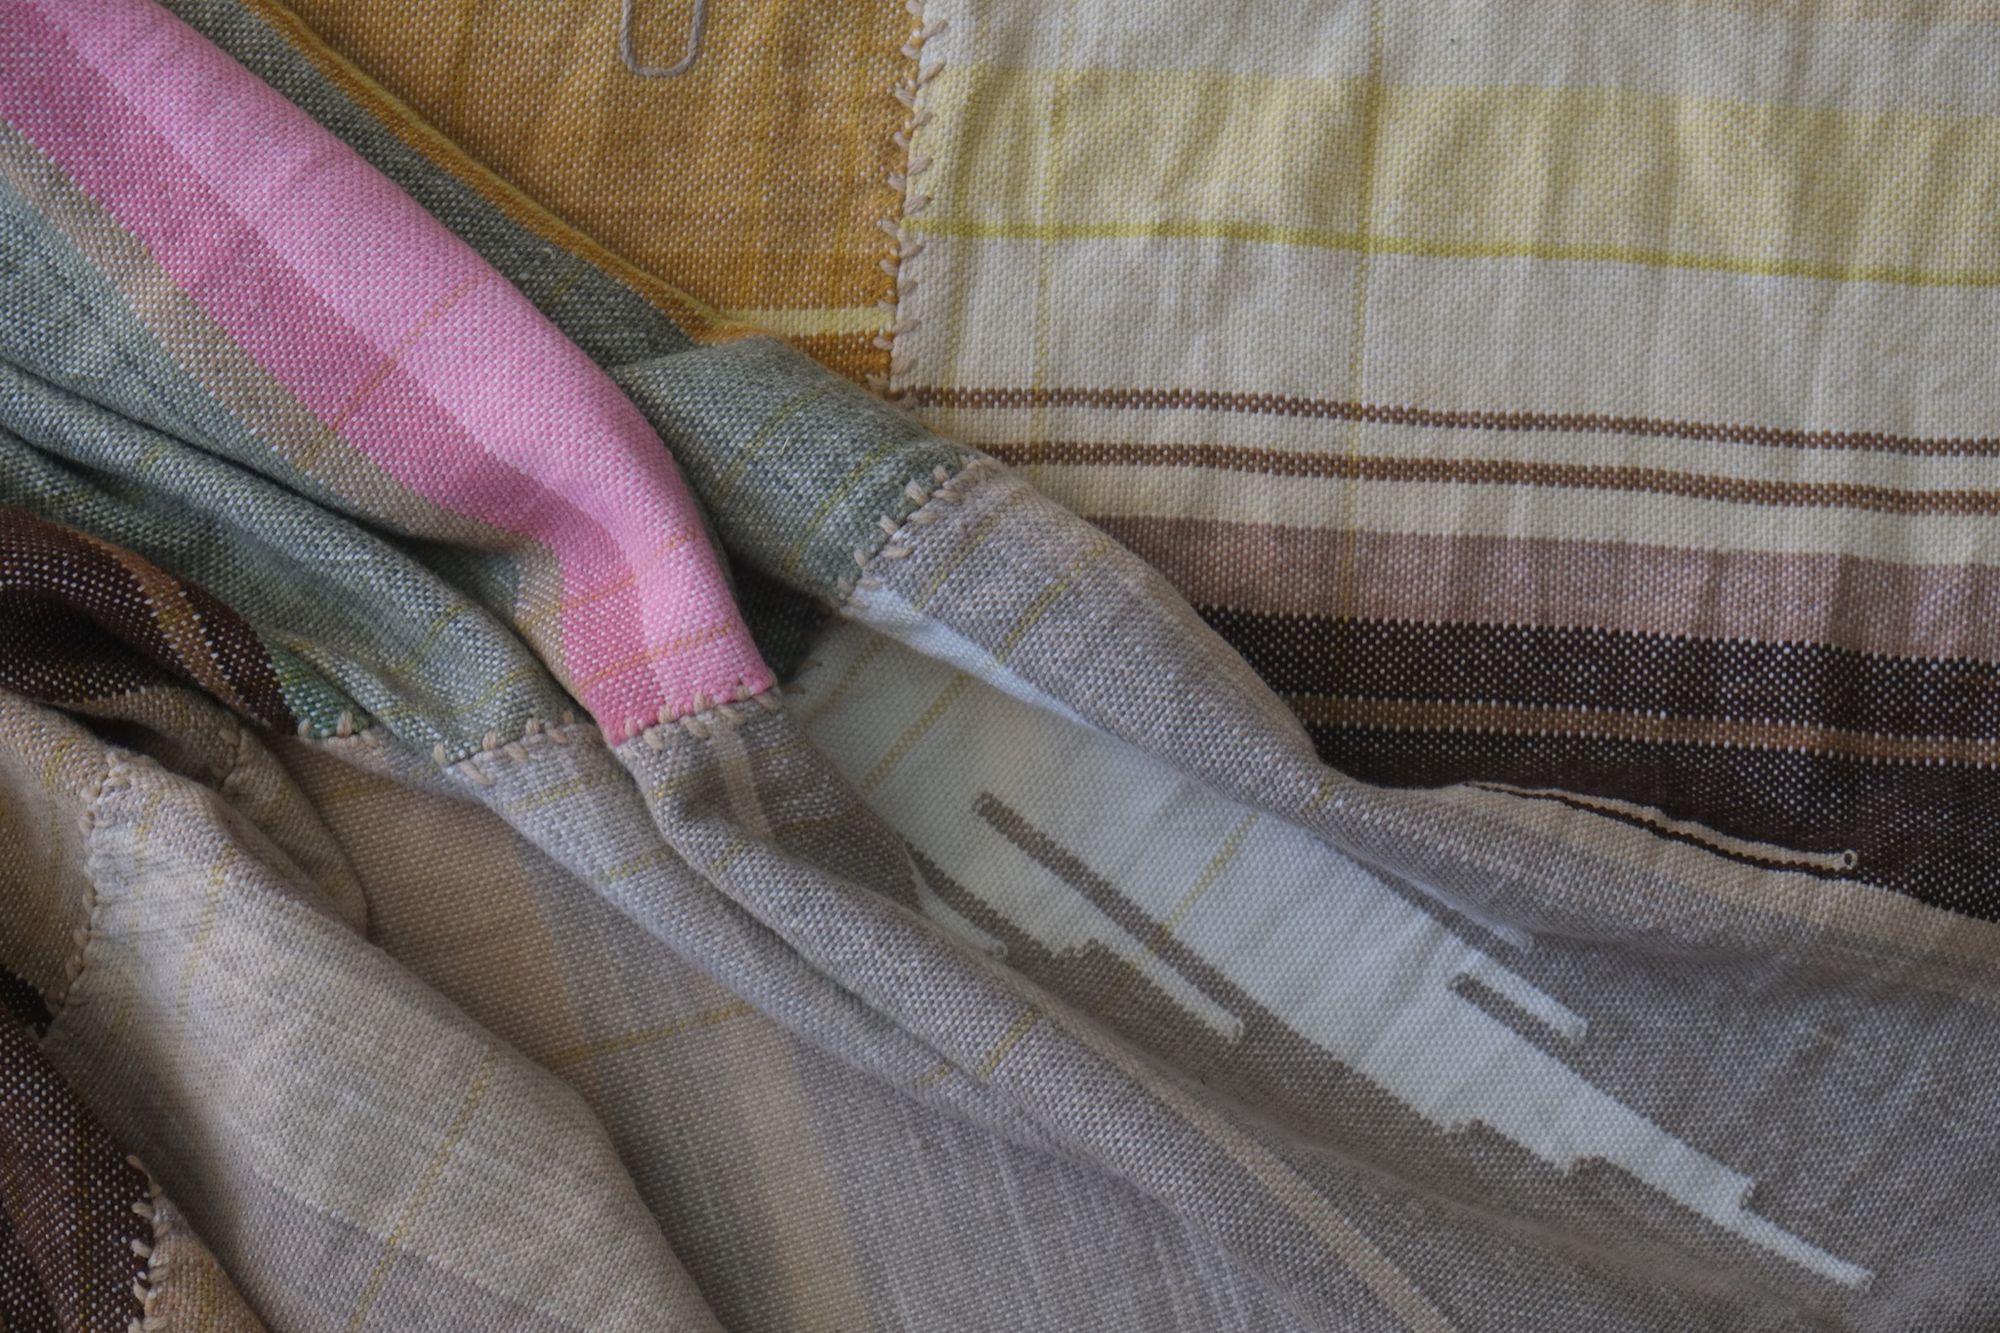 Detail of Handwoven Naturally Dyed Merino Ancient Dialogue Blanket laying on a wooden floor